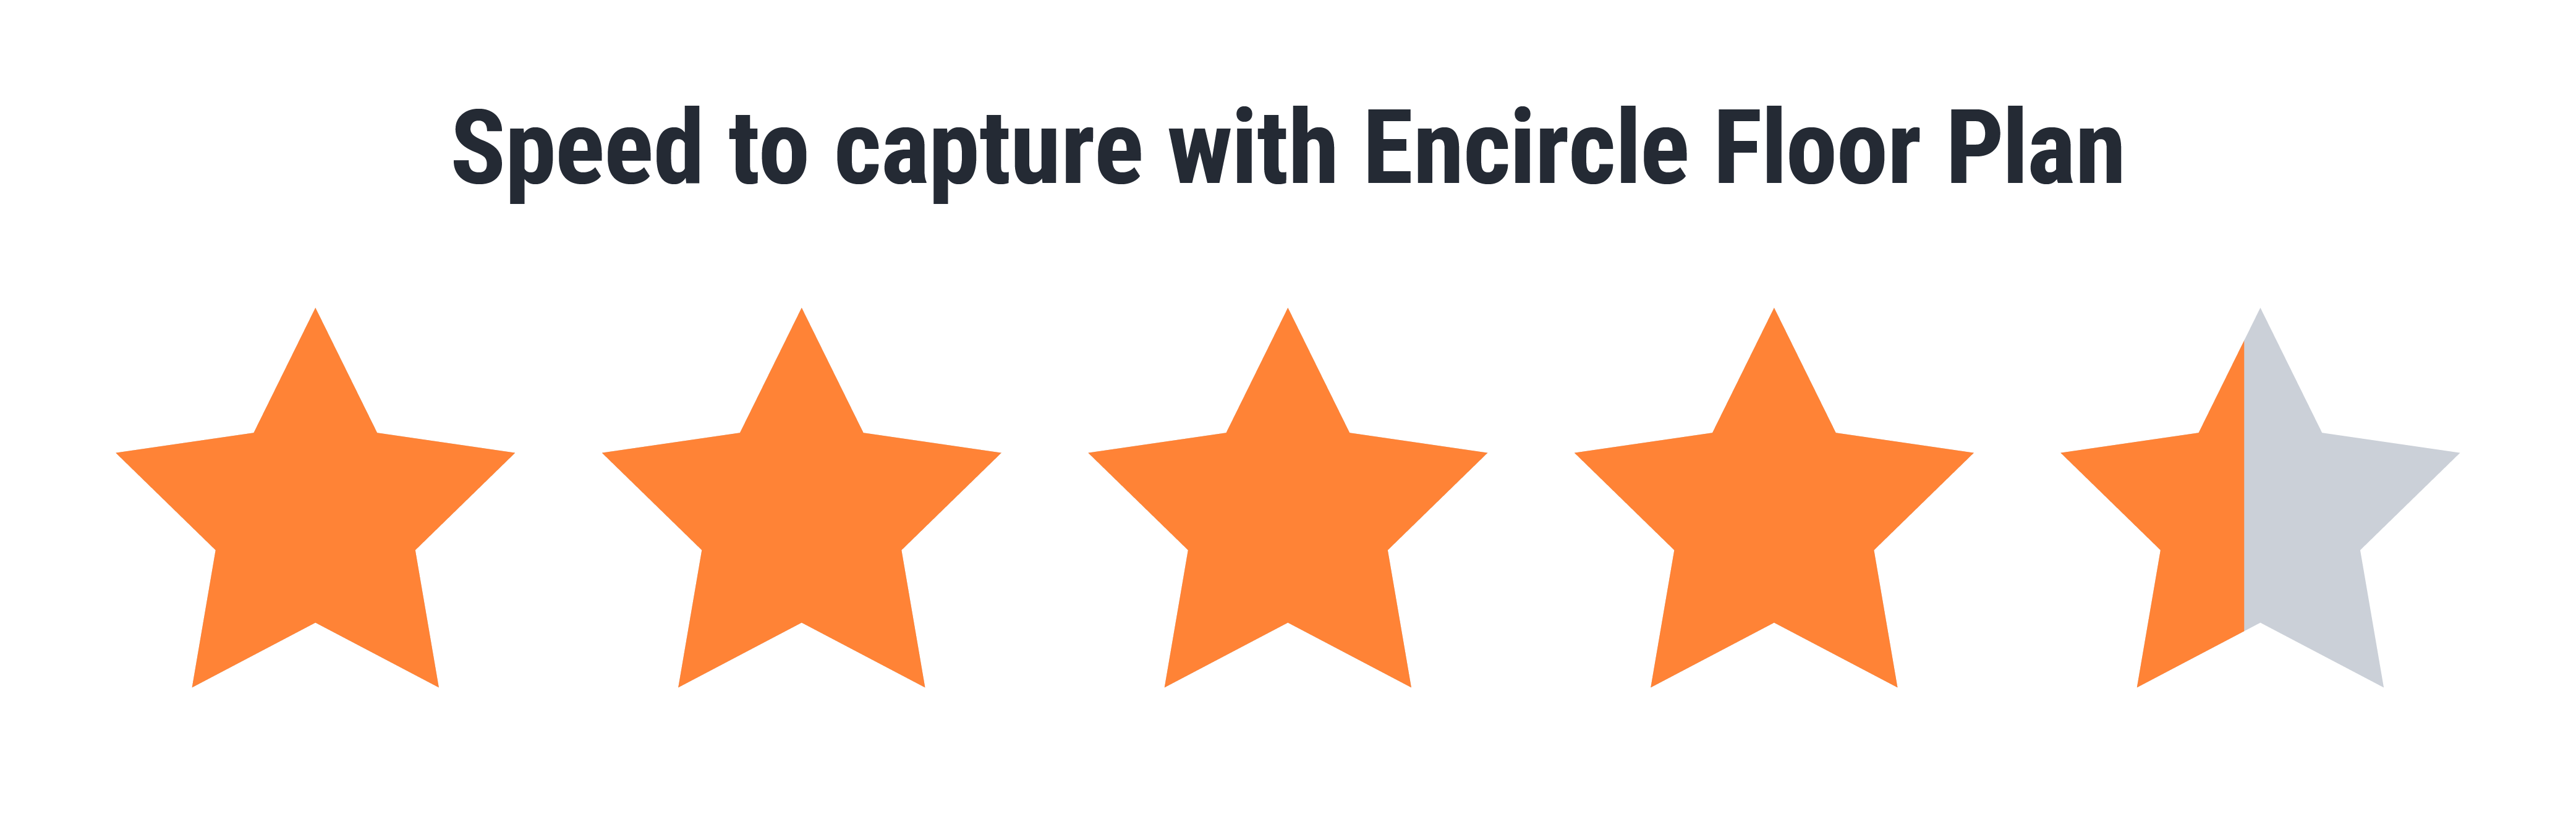 Speed to capture with Encircle Floor Plan.